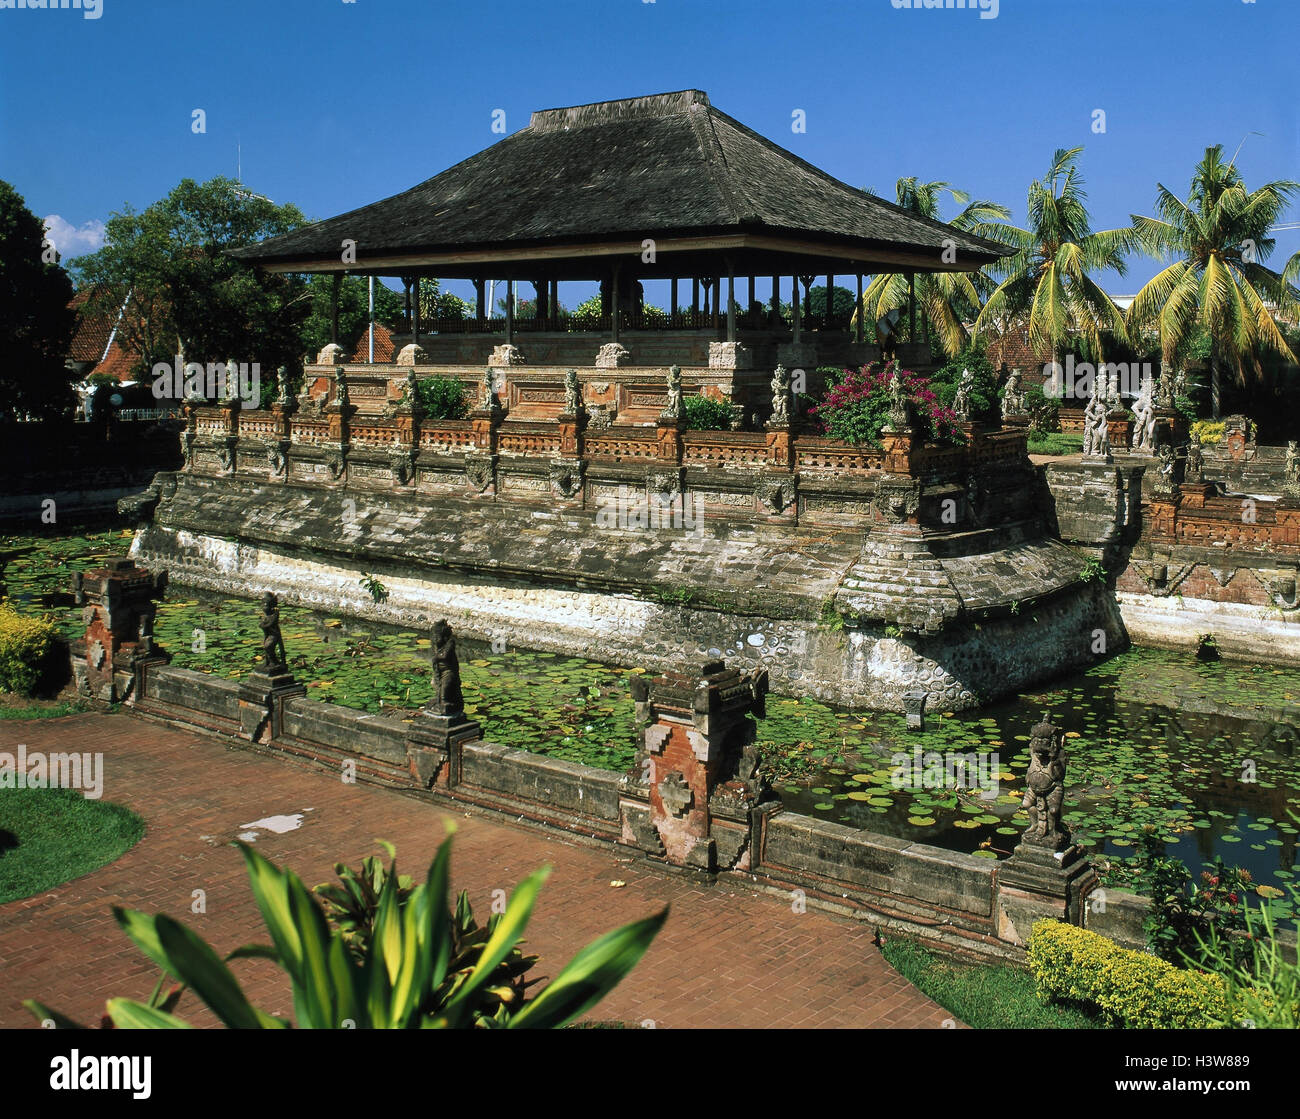 Indonesia, Bali, Klungkung, dish hall 'Kerta Gosa', 18' cent., Asia, small Sundainseln, island, temple, temple plant, structure, architecture, gel gel architecture, culture, place of interest Stock Photo